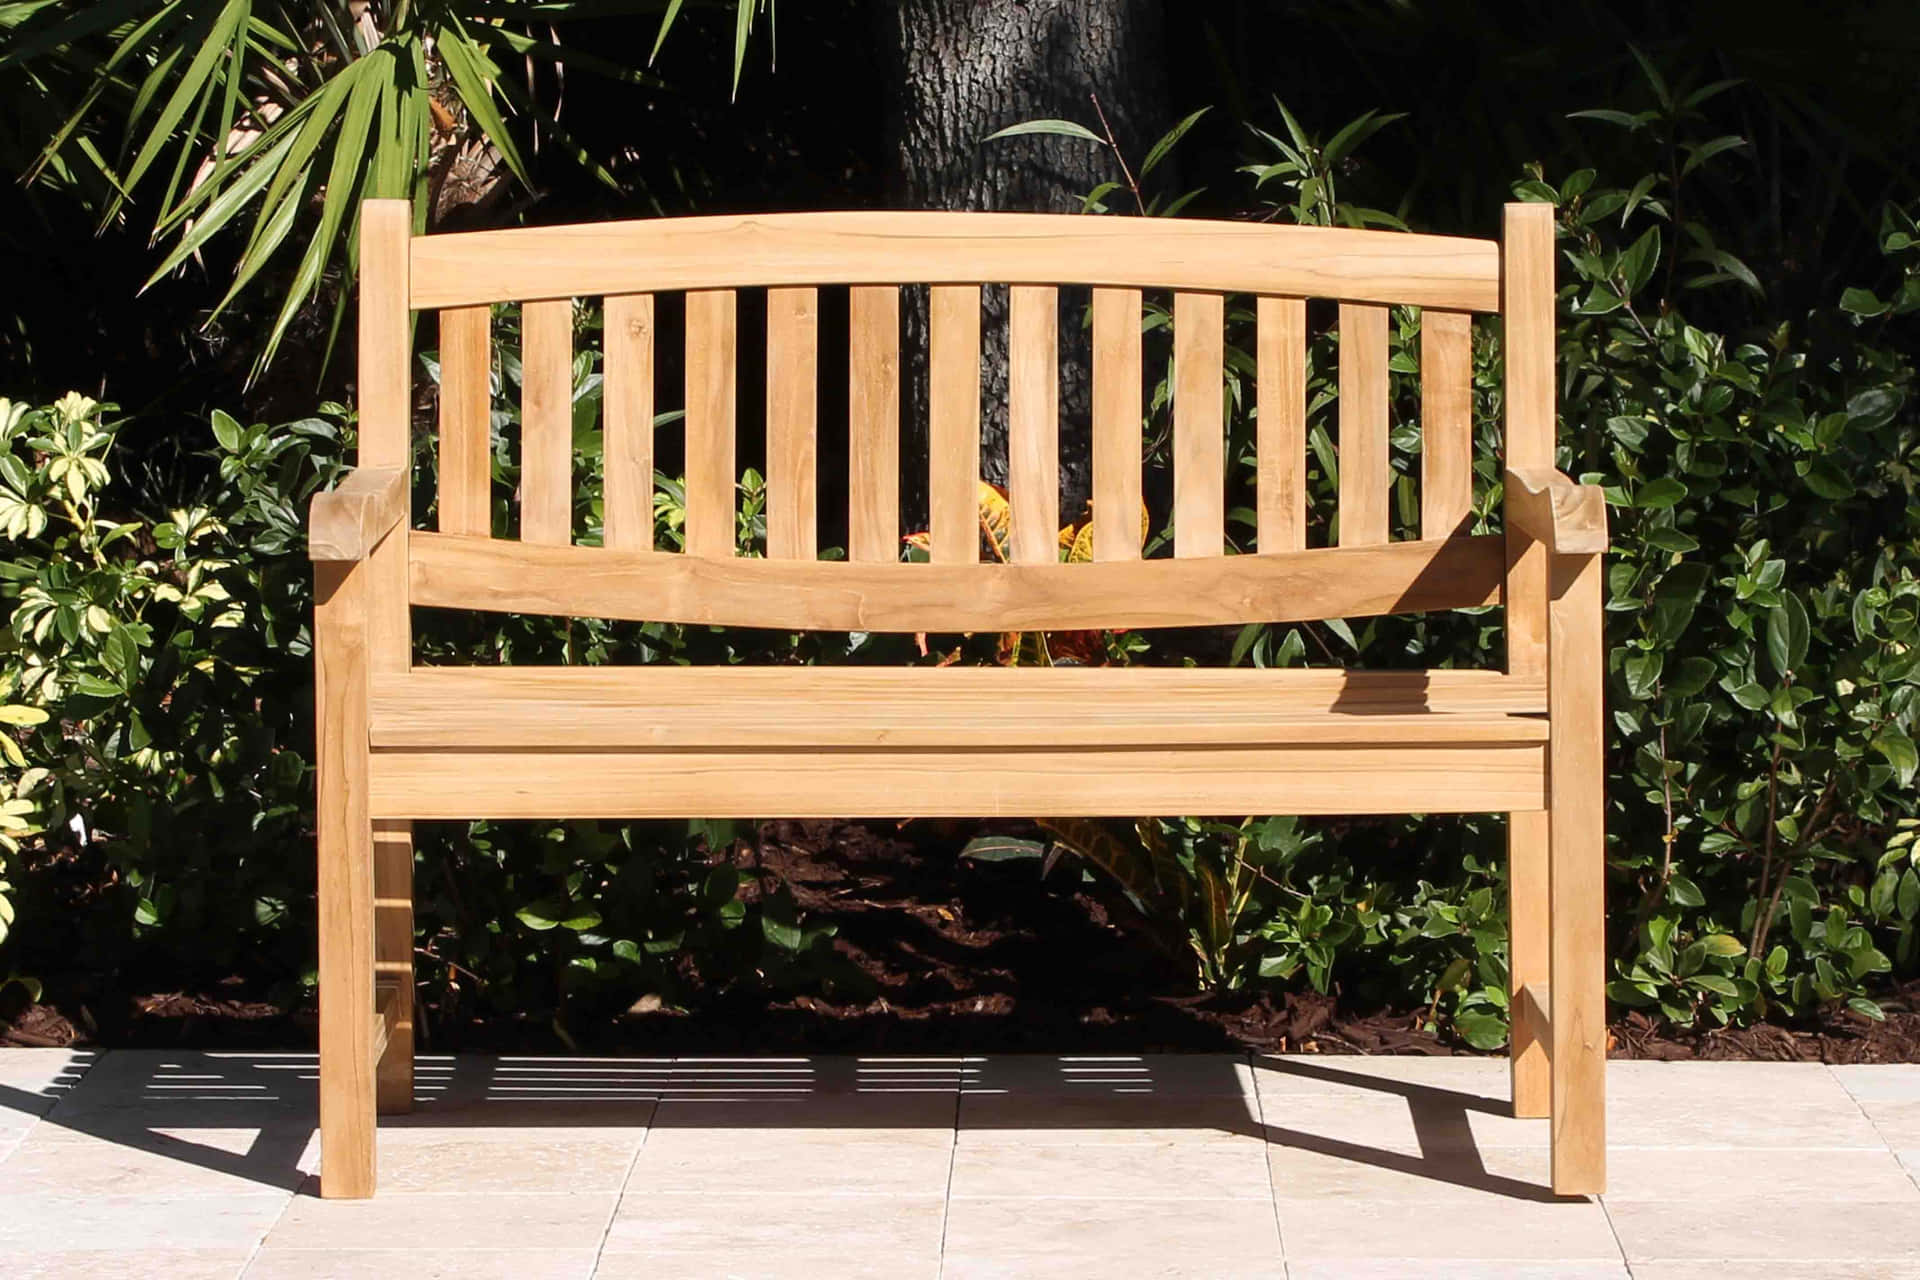 From busy city streets to peaceful outdoor spaces, benches are the perfect spot to take a break.